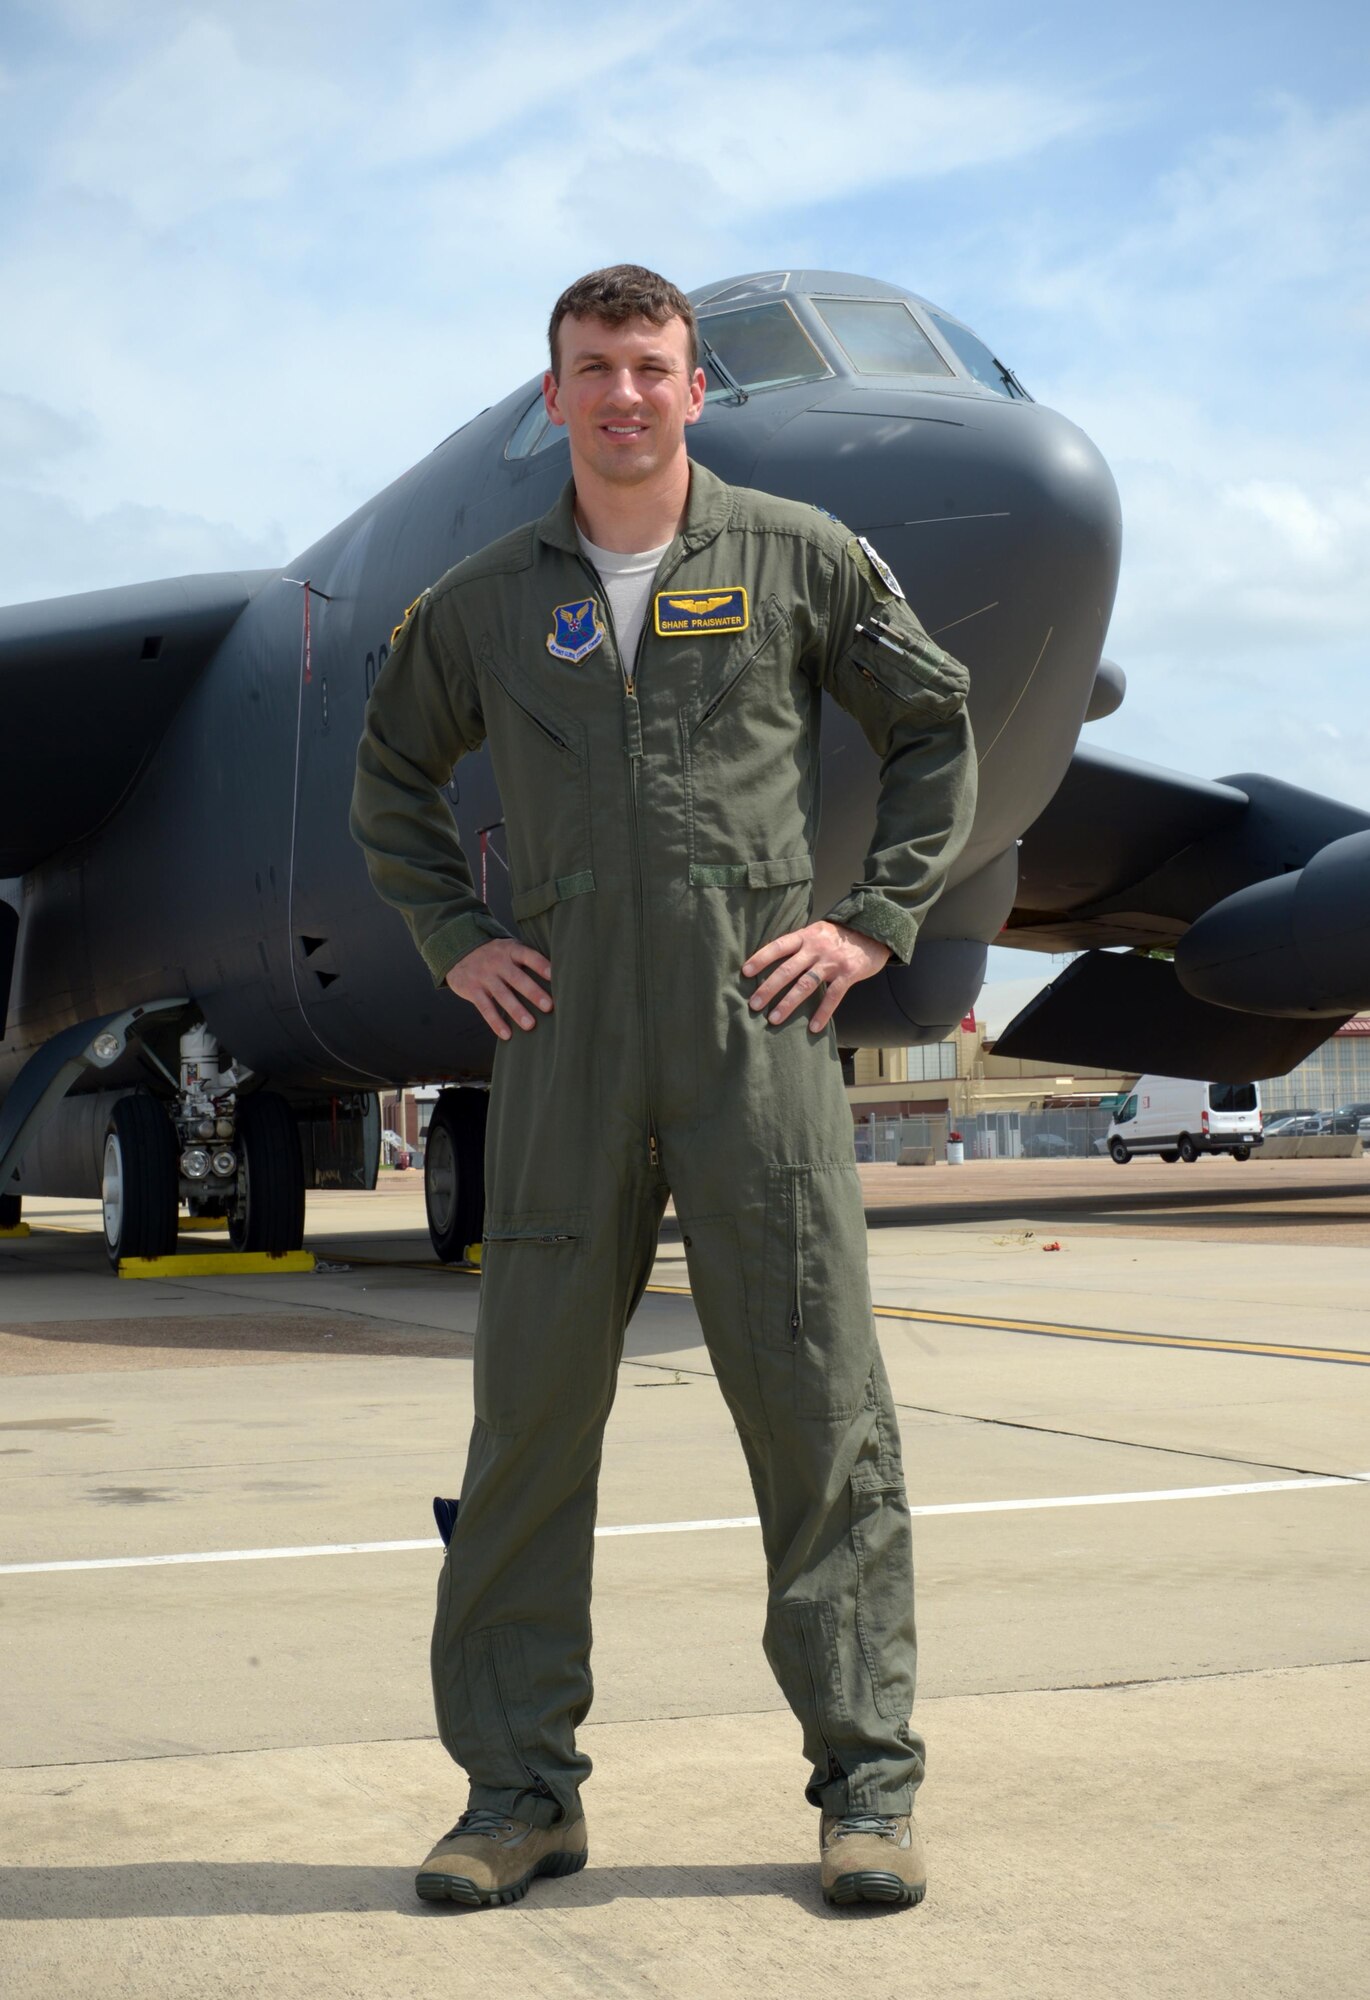 Capt. Shane Praiswater, 2nd Operations Support Squadron wing weapons officer, poses for a photo at Barksdale Air Force Base, La., June 14, 2016. Praiswater is one of three Air Force Global Strike Command officers selected for the command’s prestigious Striker Pathfinder Internship, a two-year program filled with professional development opportunities. (U.S. Air Force photo/Senior Airman Curt Beach)